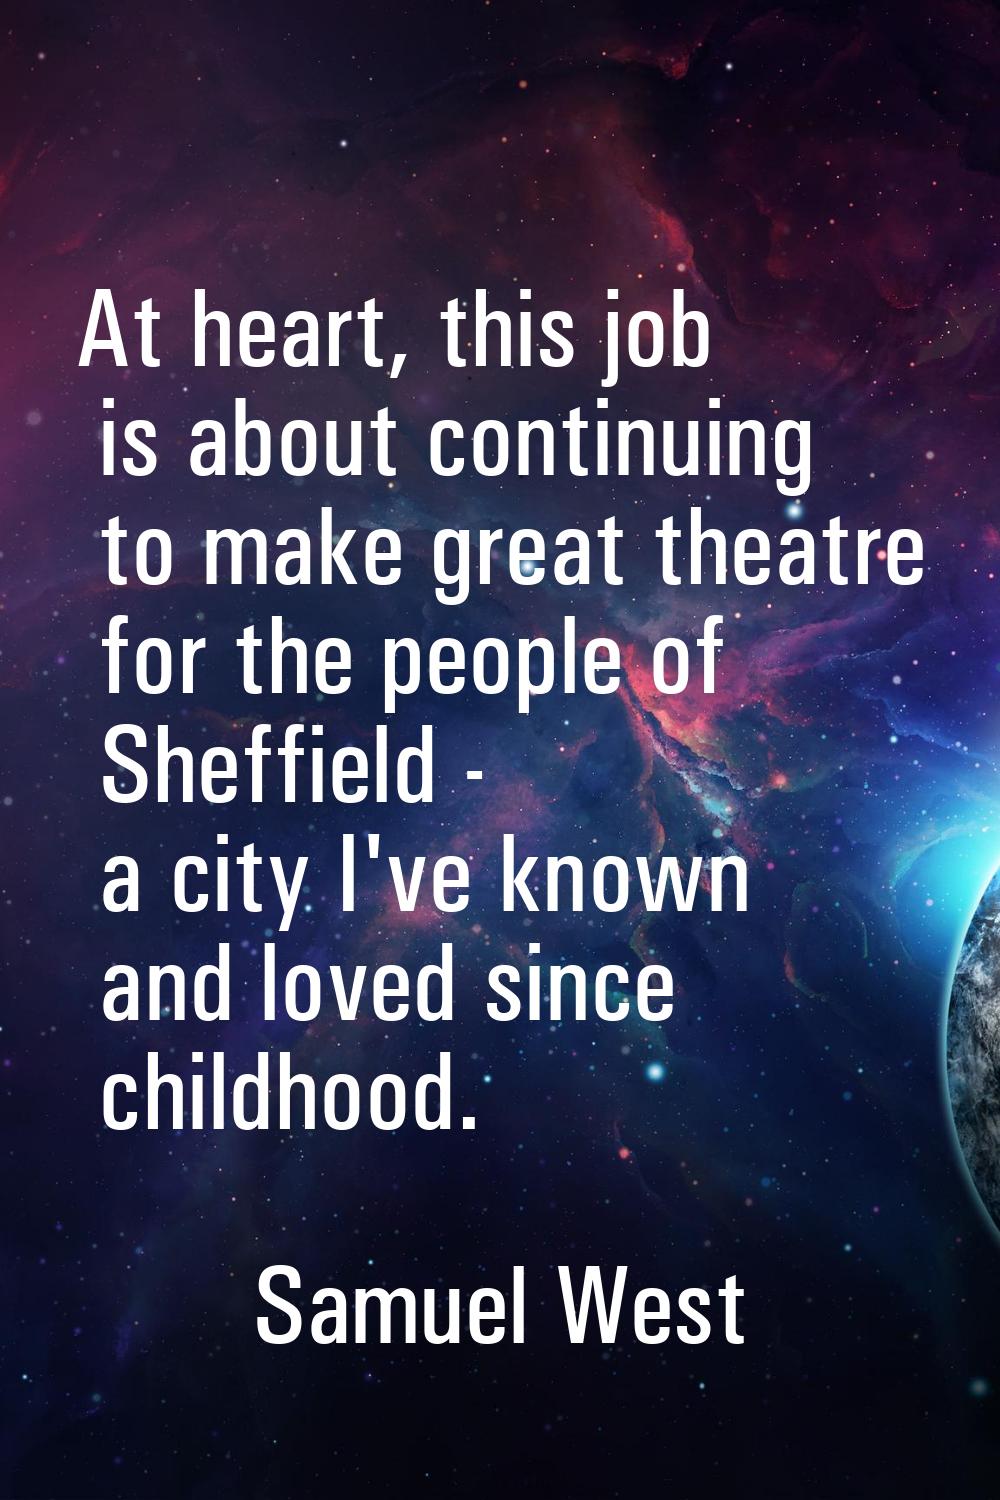 At heart, this job is about continuing to make great theatre for the people of Sheffield - a city I